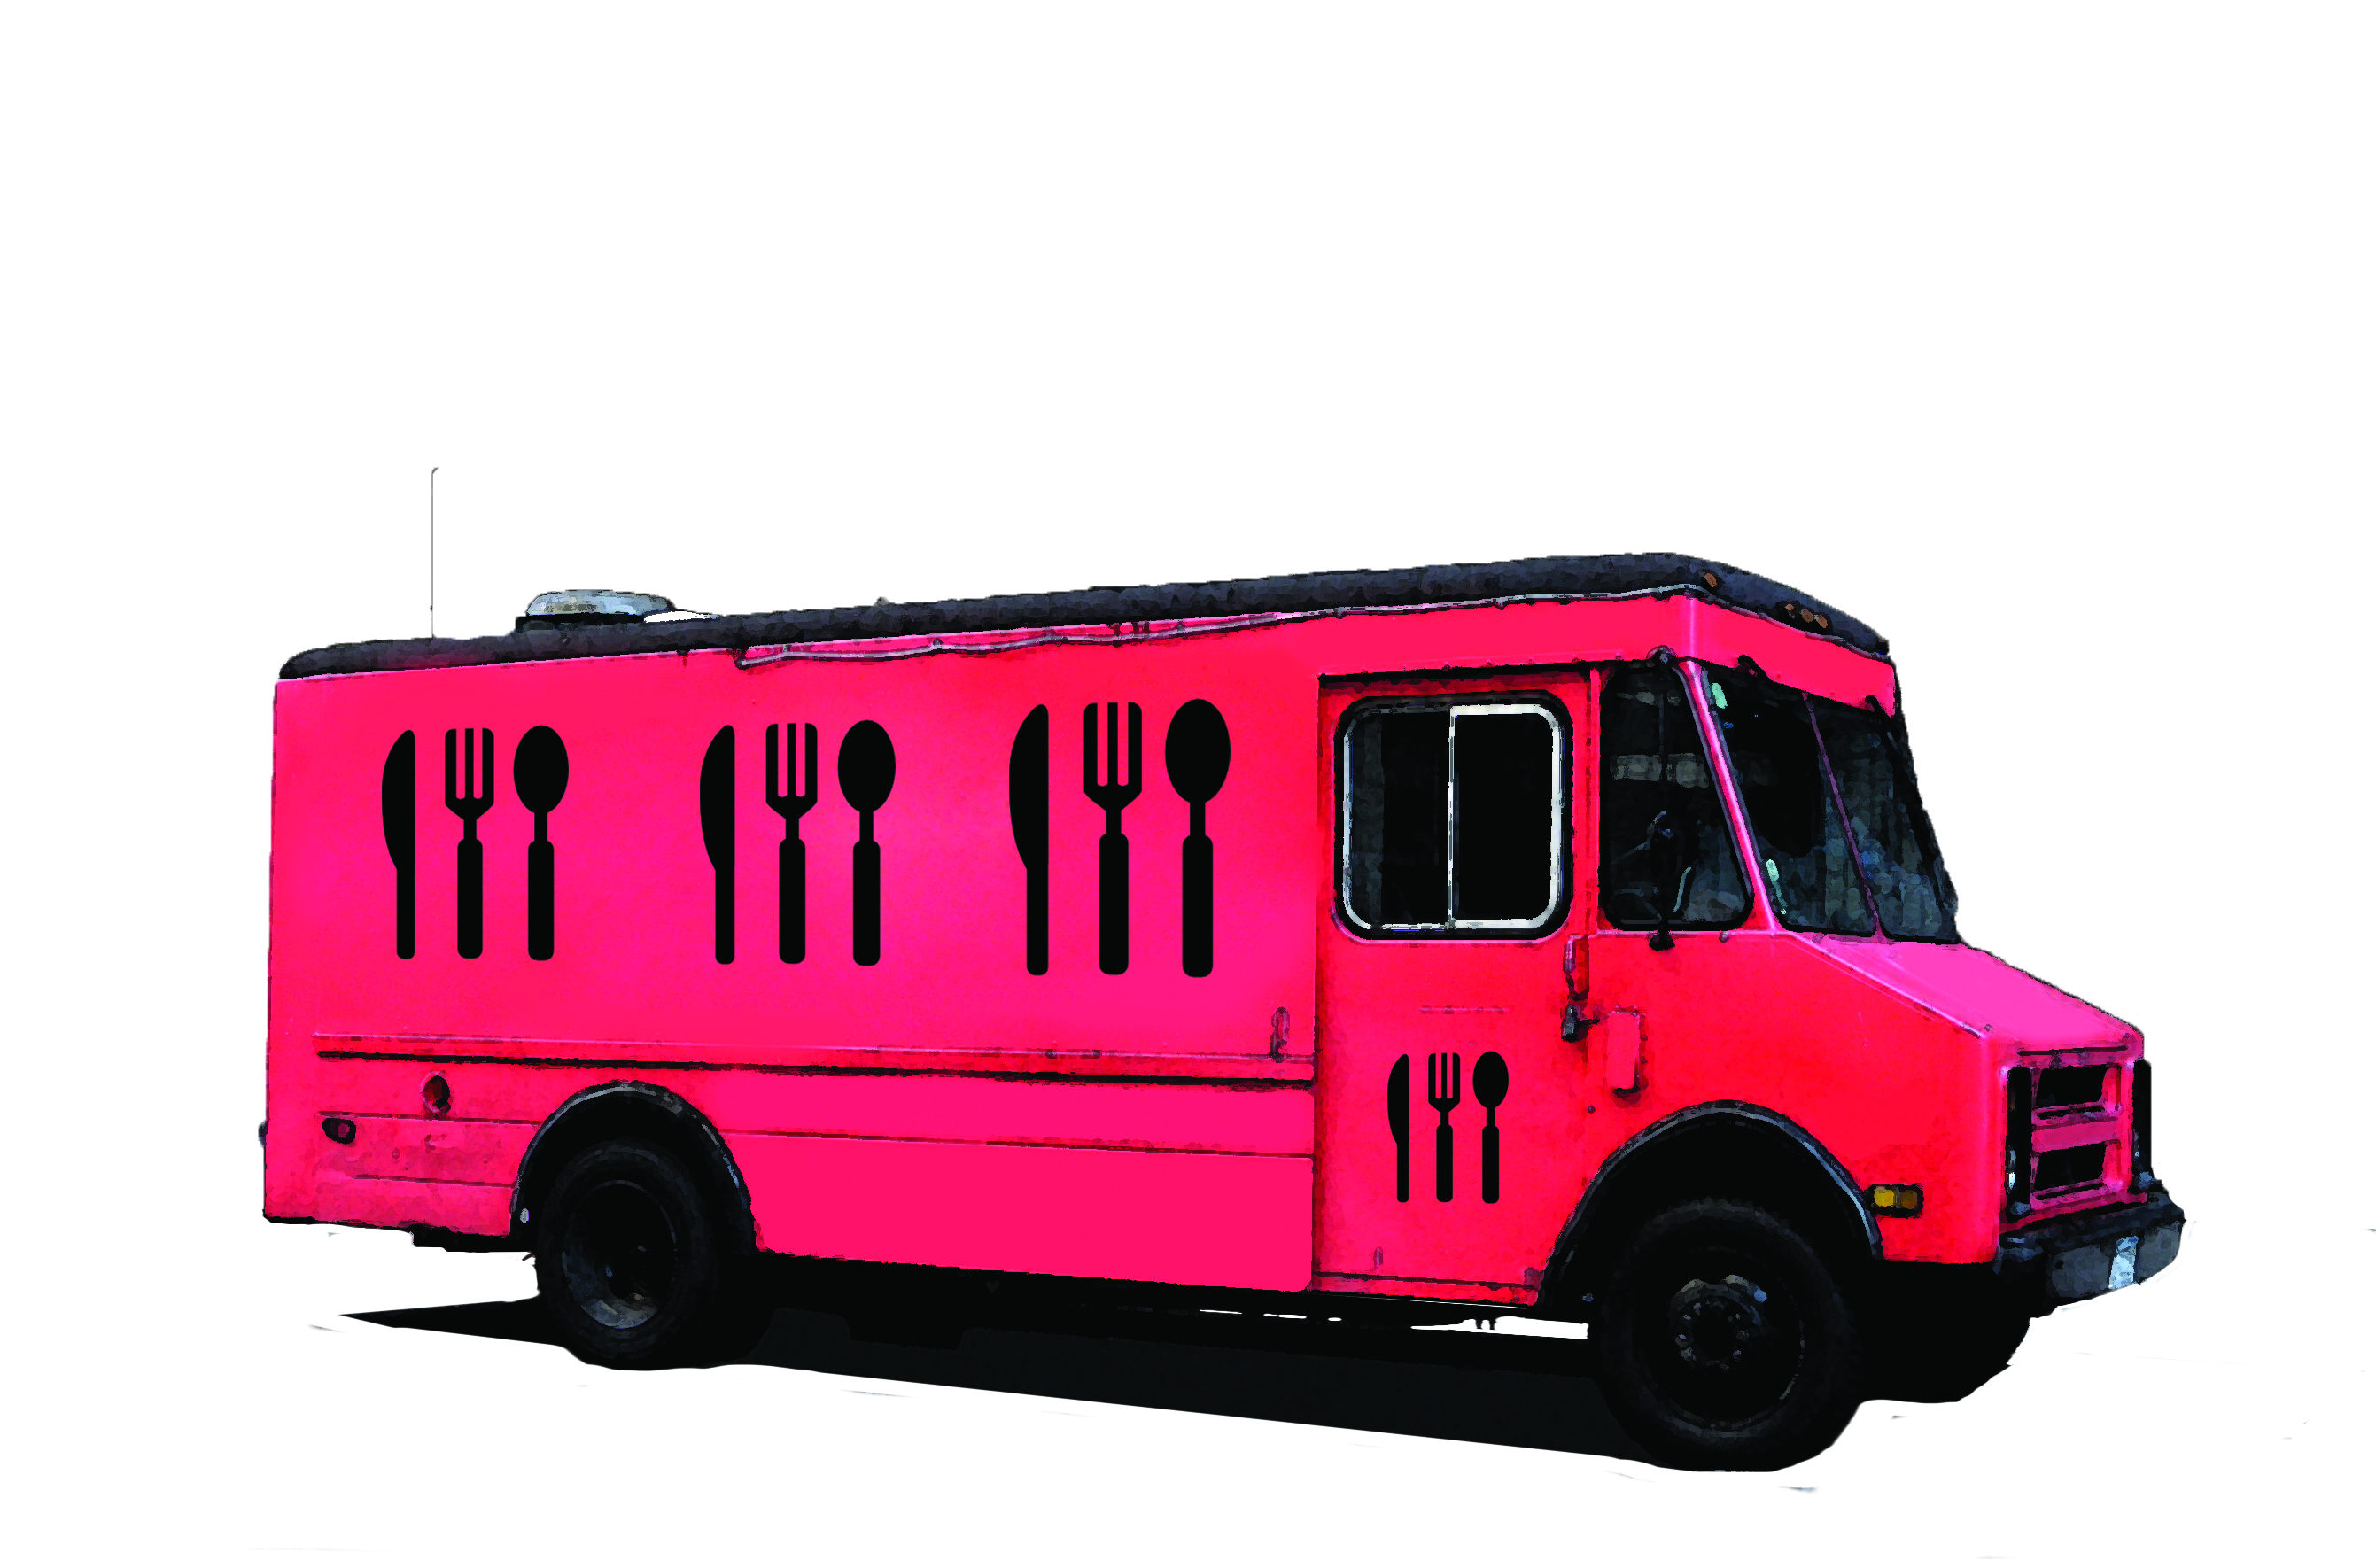 Meals On Wheels: Mobile Food Truck Comes to Citrus Campus